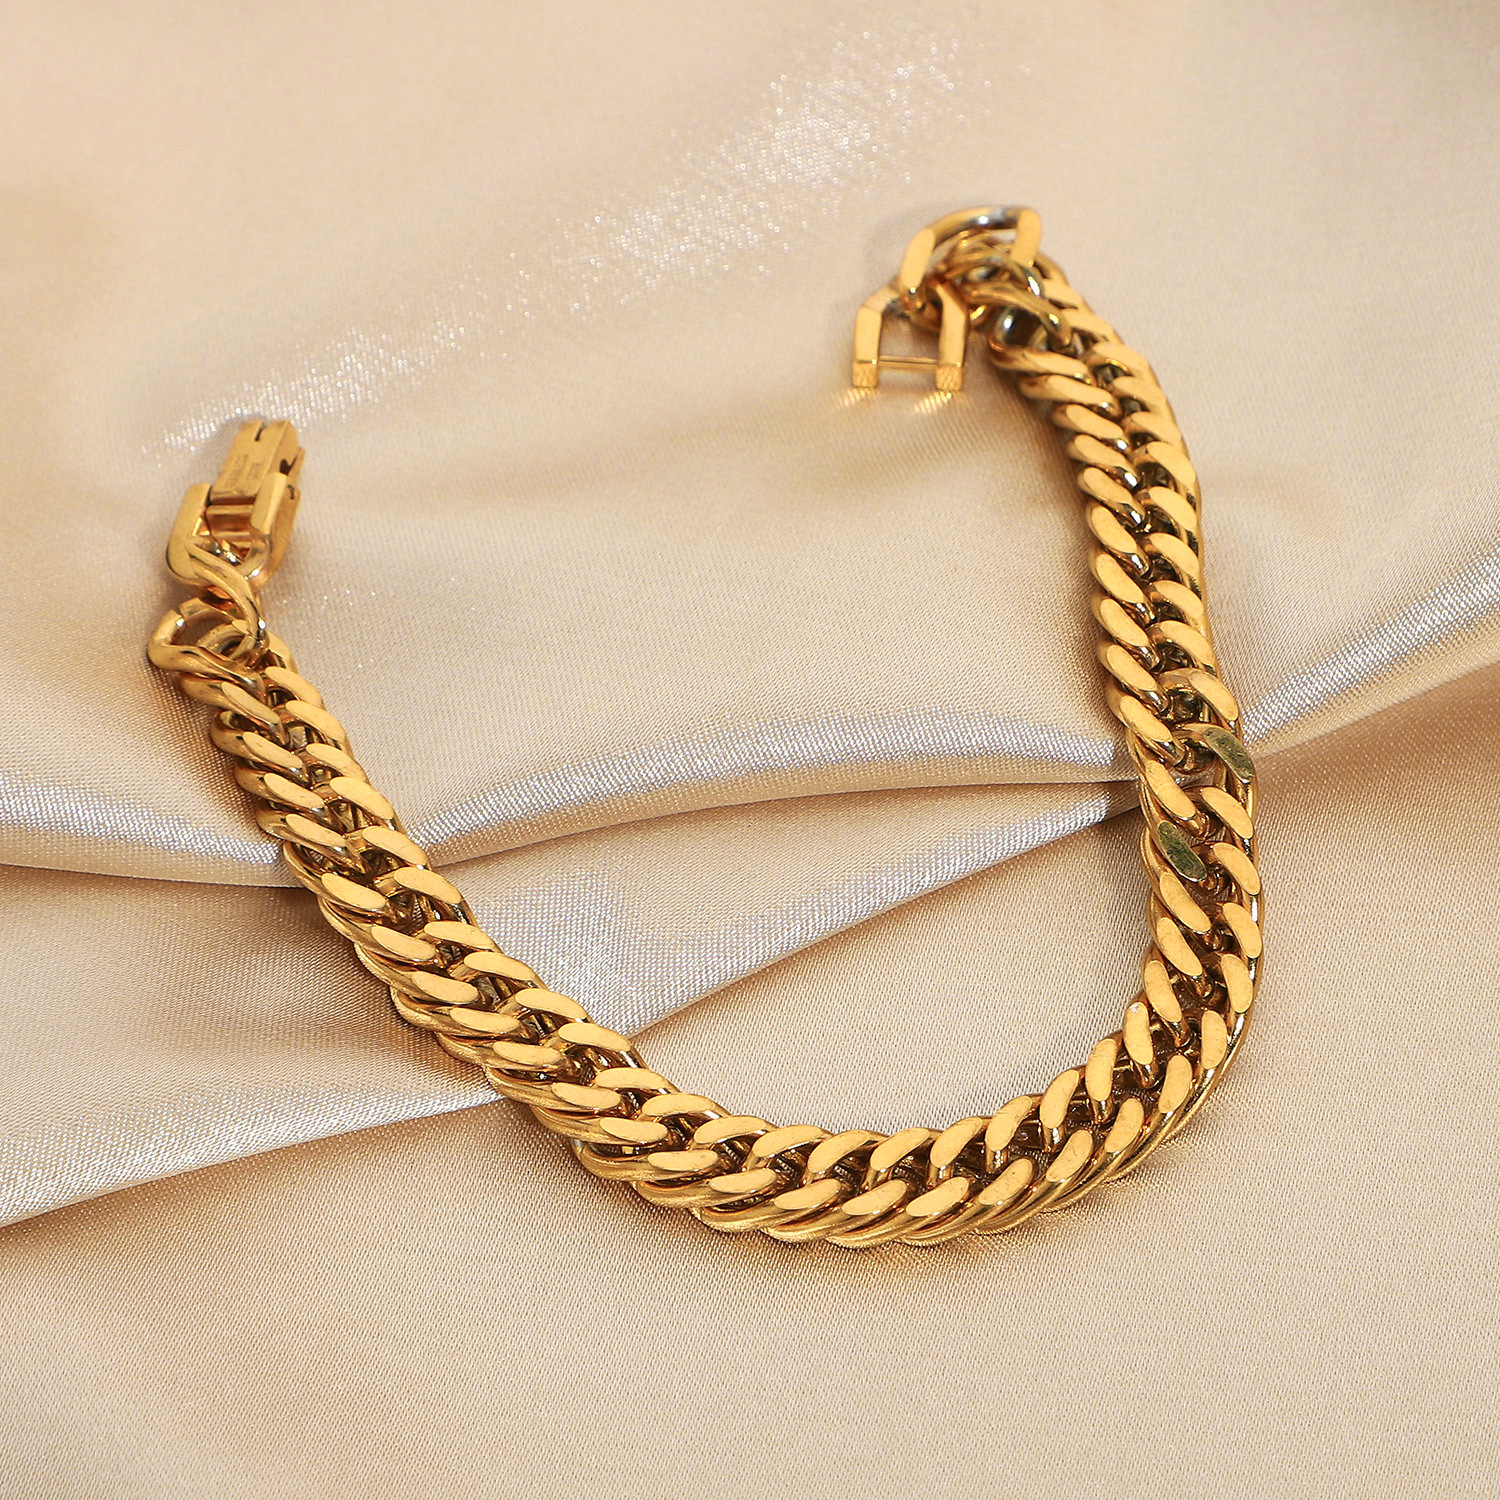 European and American 73mm thick Cuban chain bracelet 18K goldplated stainless steel braceletpicture6